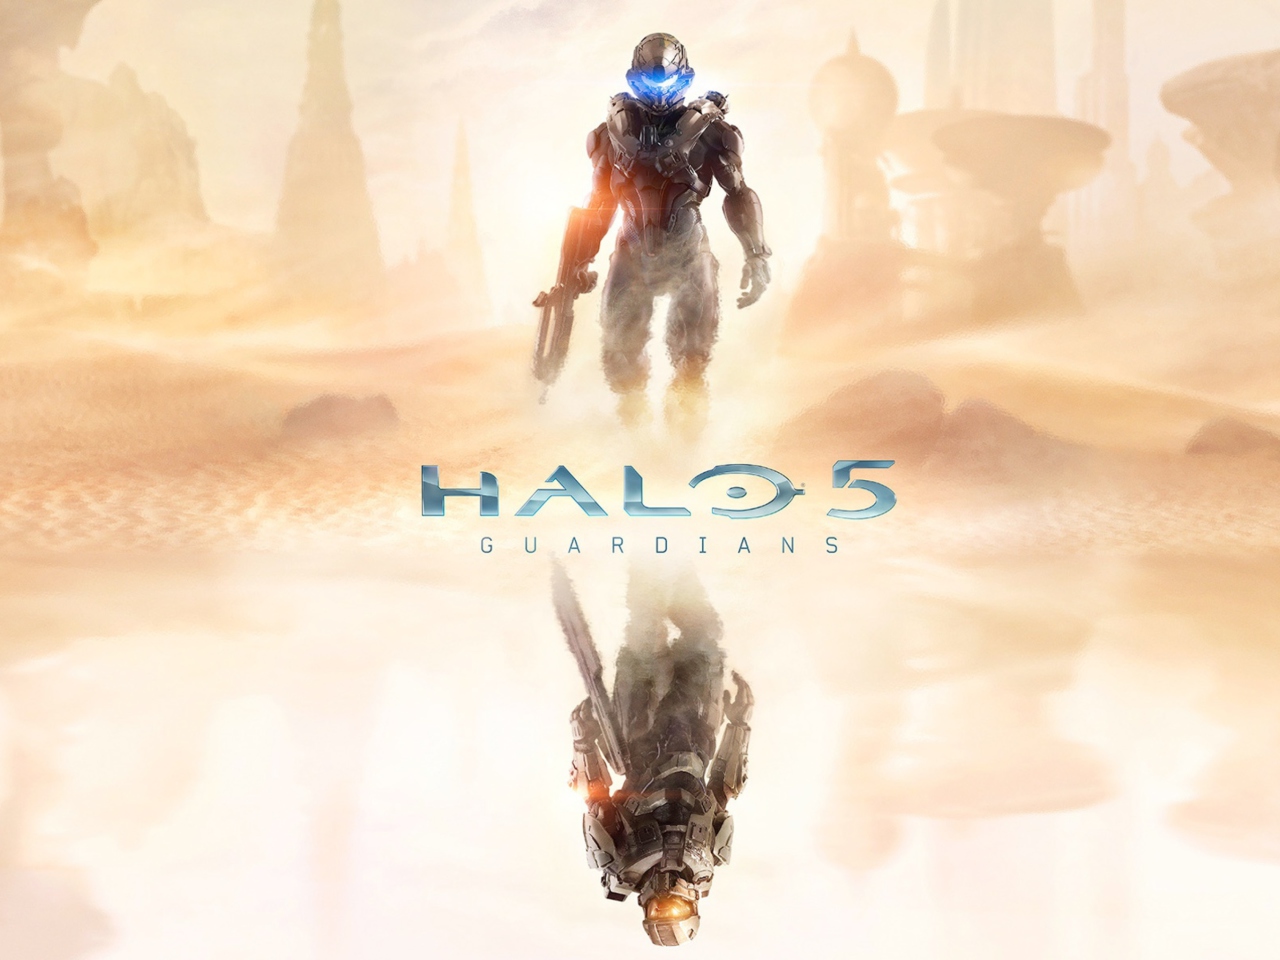 Halo 5 Guardians 2015 Game wallpaper 1280x960